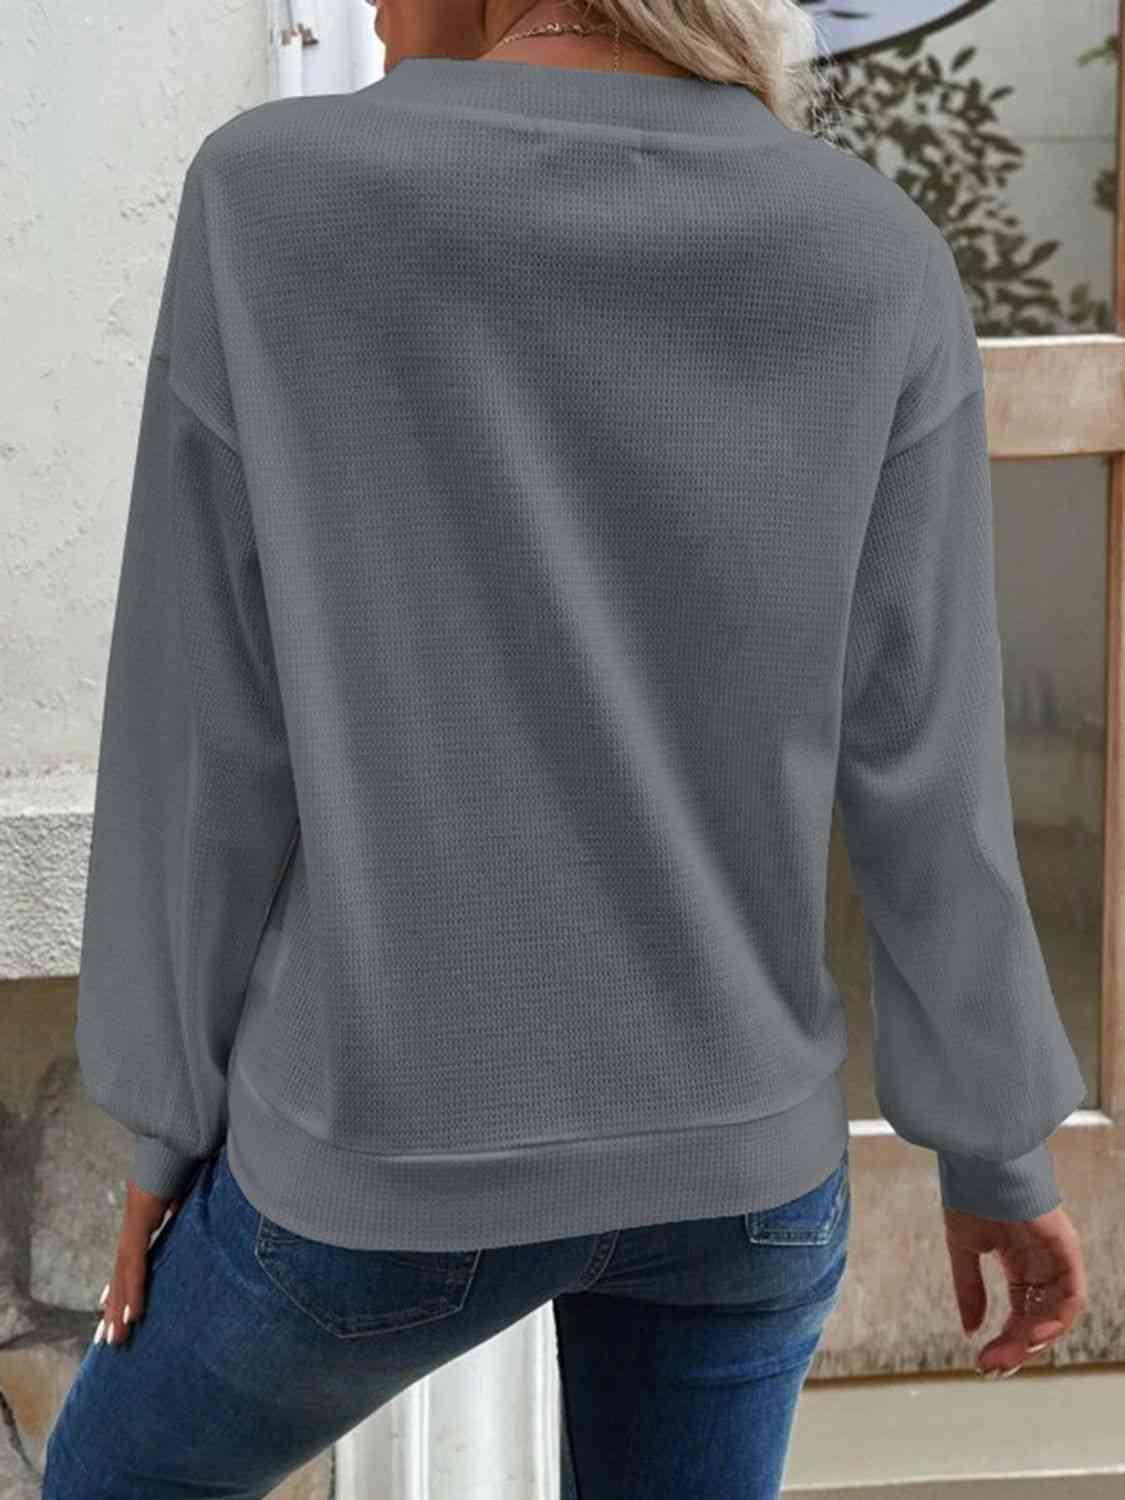 a woman wearing a grey sweater and jeans